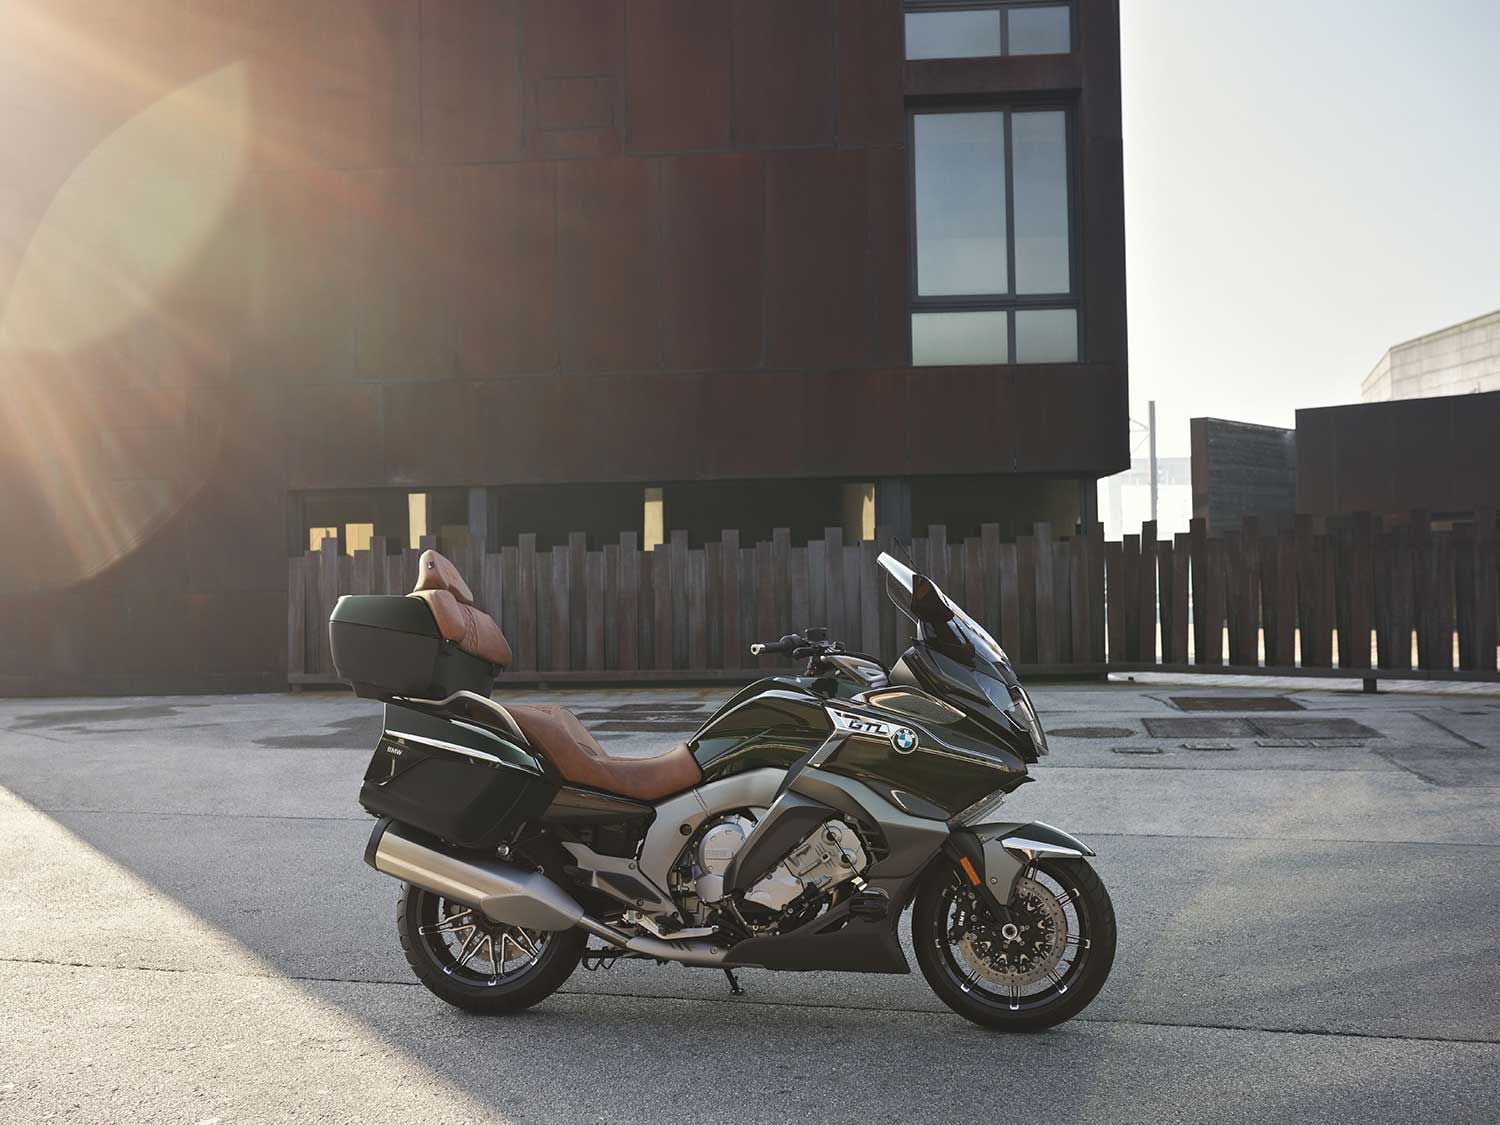 Designed for sport-touring, the K 1600 GTL with its six-cylinder engine is one of the fastest motorcycles you can buy.